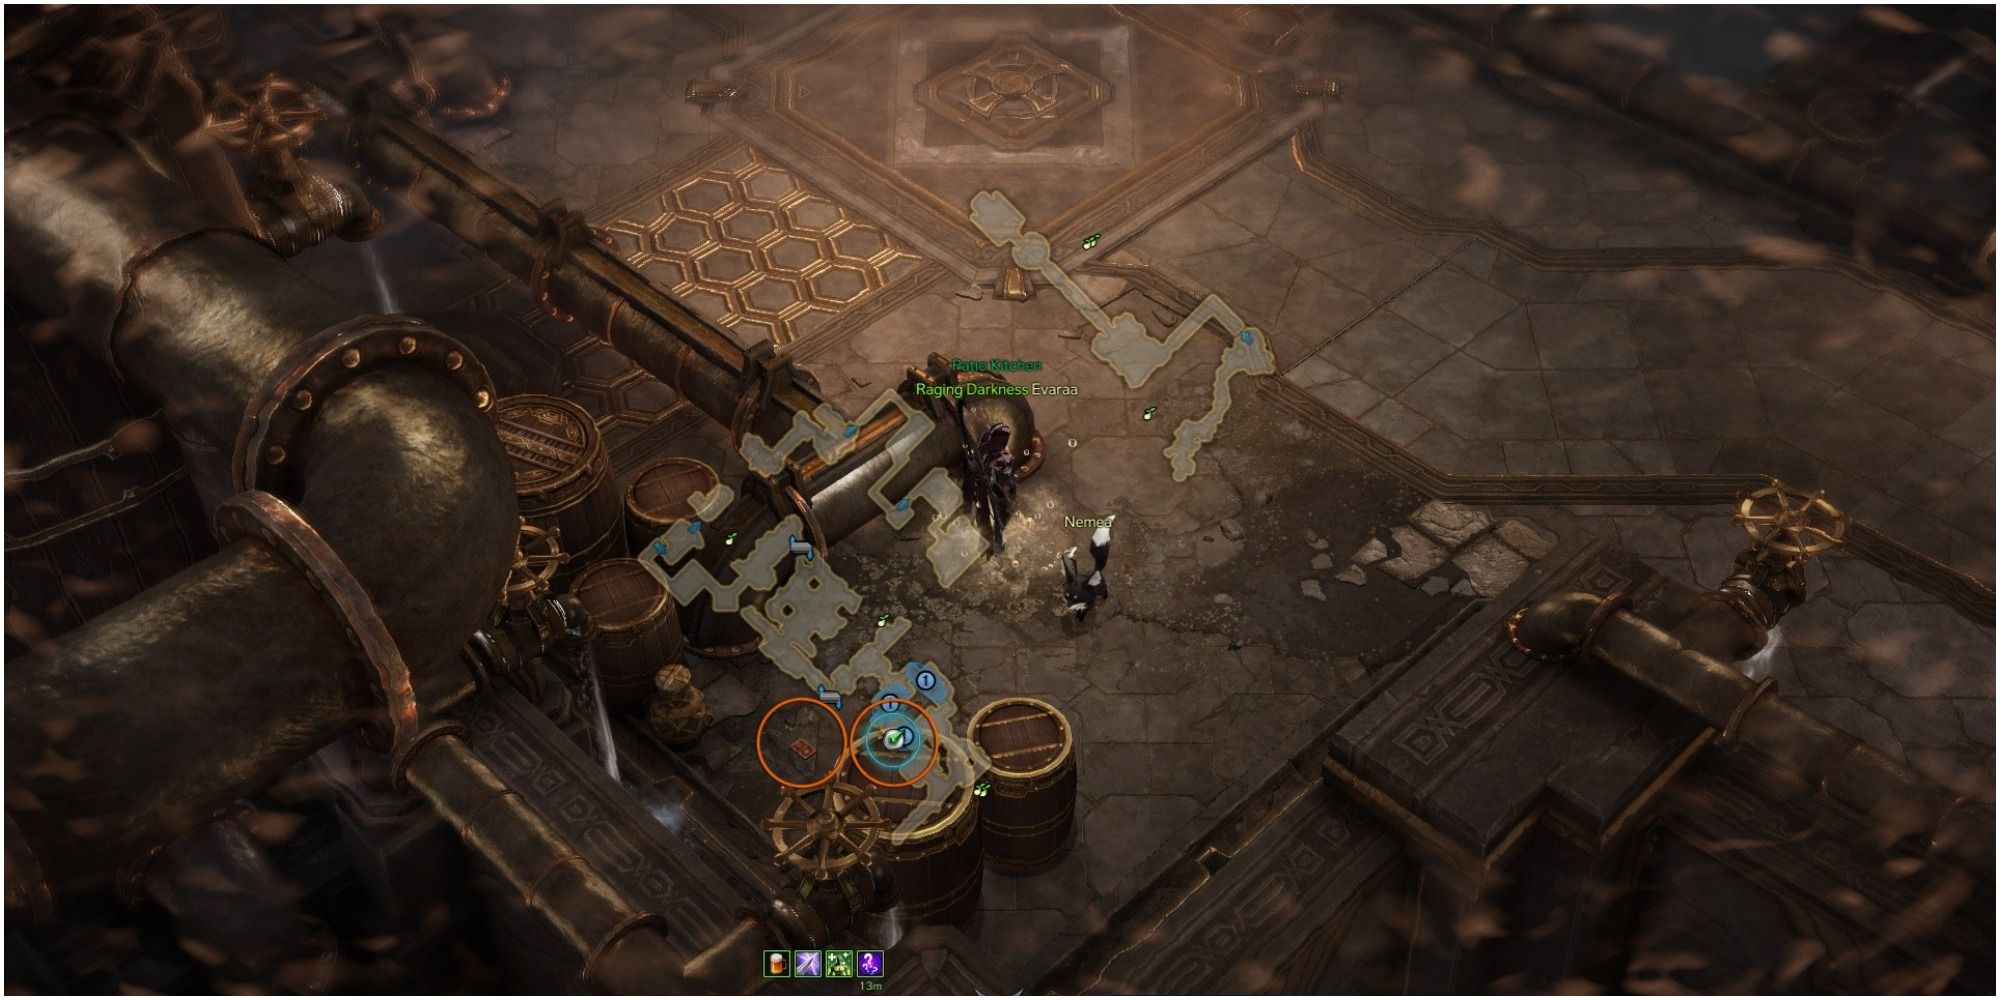 Lost Ark Yorn's Hidden Story 4-1 location with mini-map open, orange circle around object and player icon